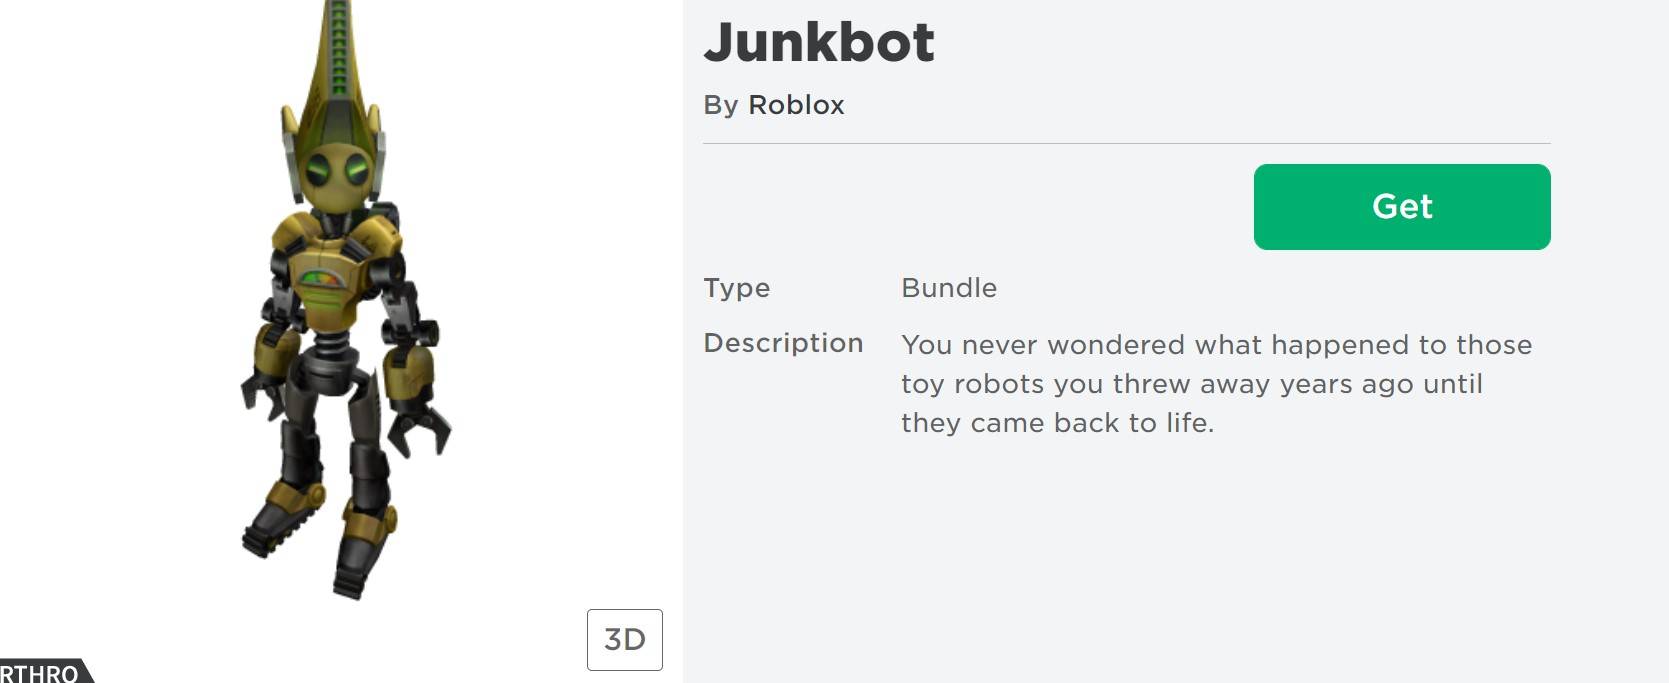 Roblox Promo Codes For Free Items In June 2021 - free items in the roblox catalog